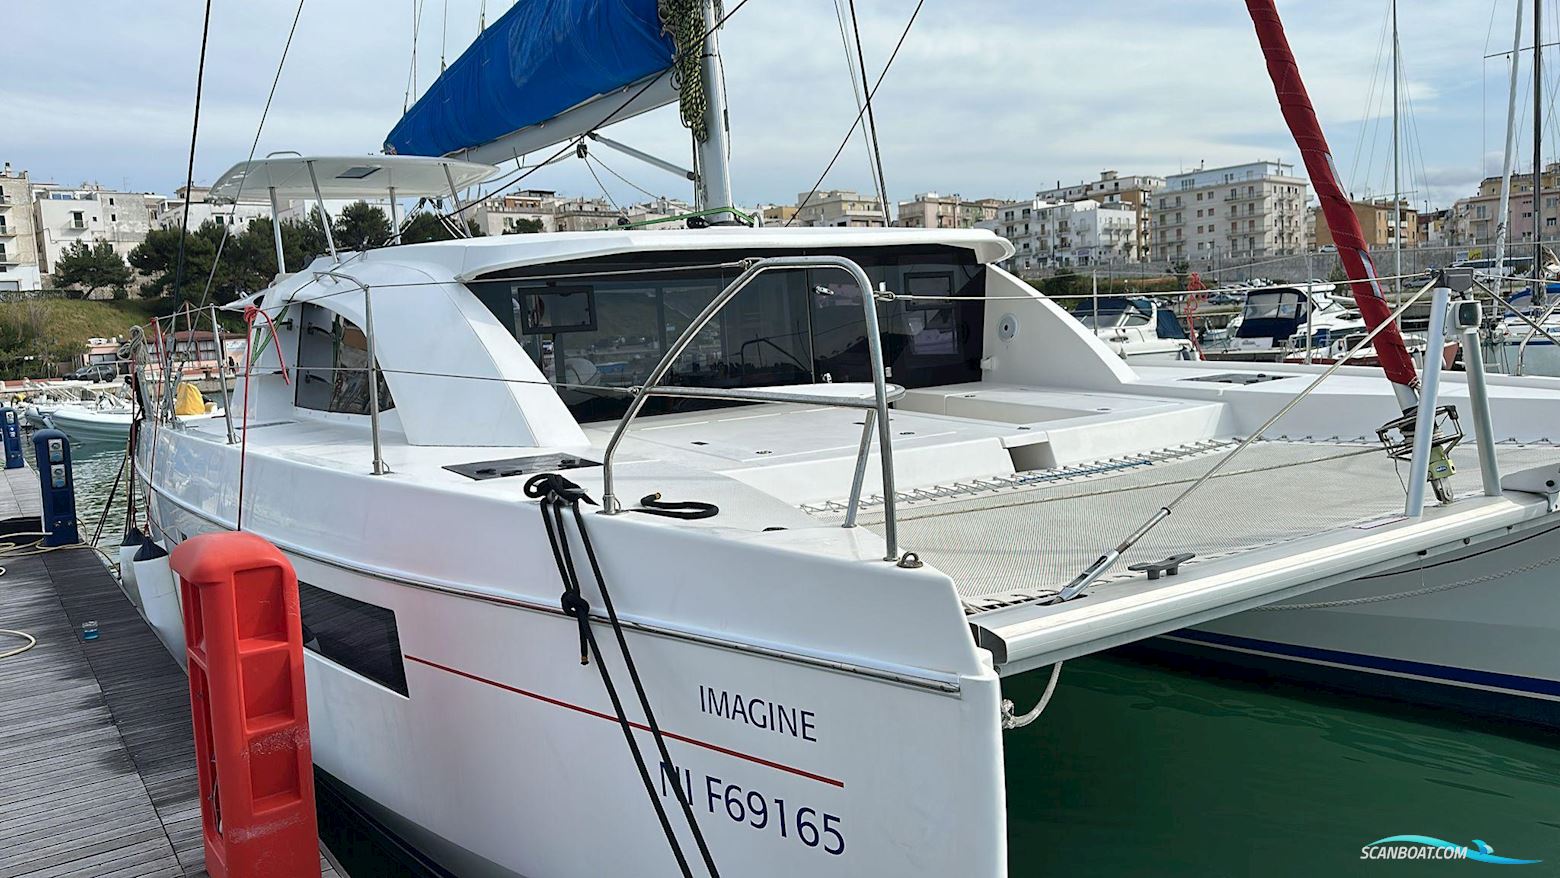 Leopard 40 Sailing boat 2018, with Yanmar engine, Italy